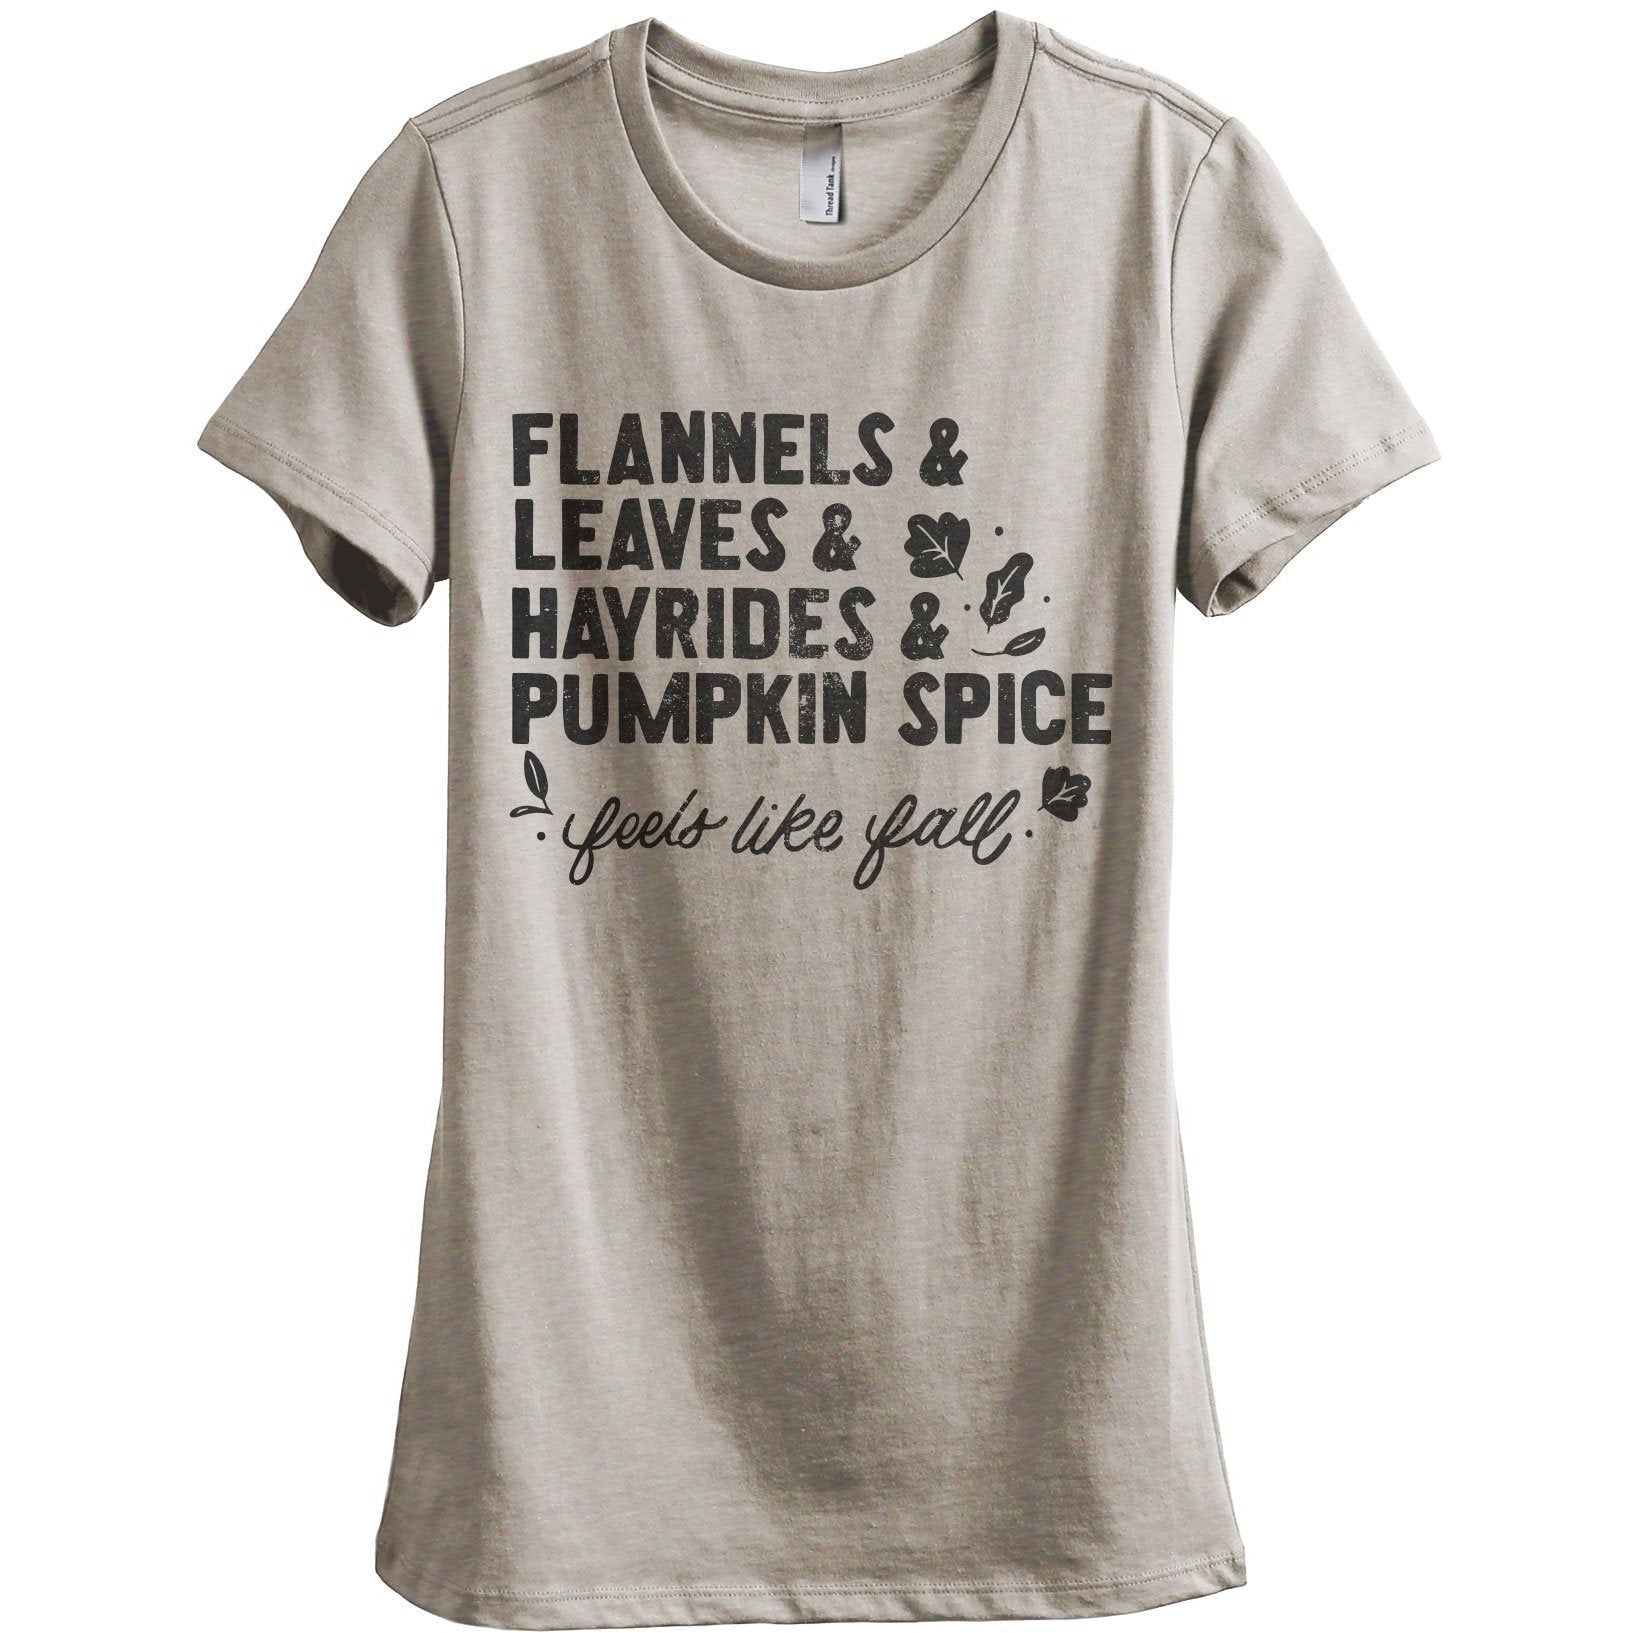 Flannels & Leaves & Hayrides & Pumpkin Spice...Feels like Fall Women's Relaxed Crewneck T-Shirt Top Tee Heather Tan Grey
